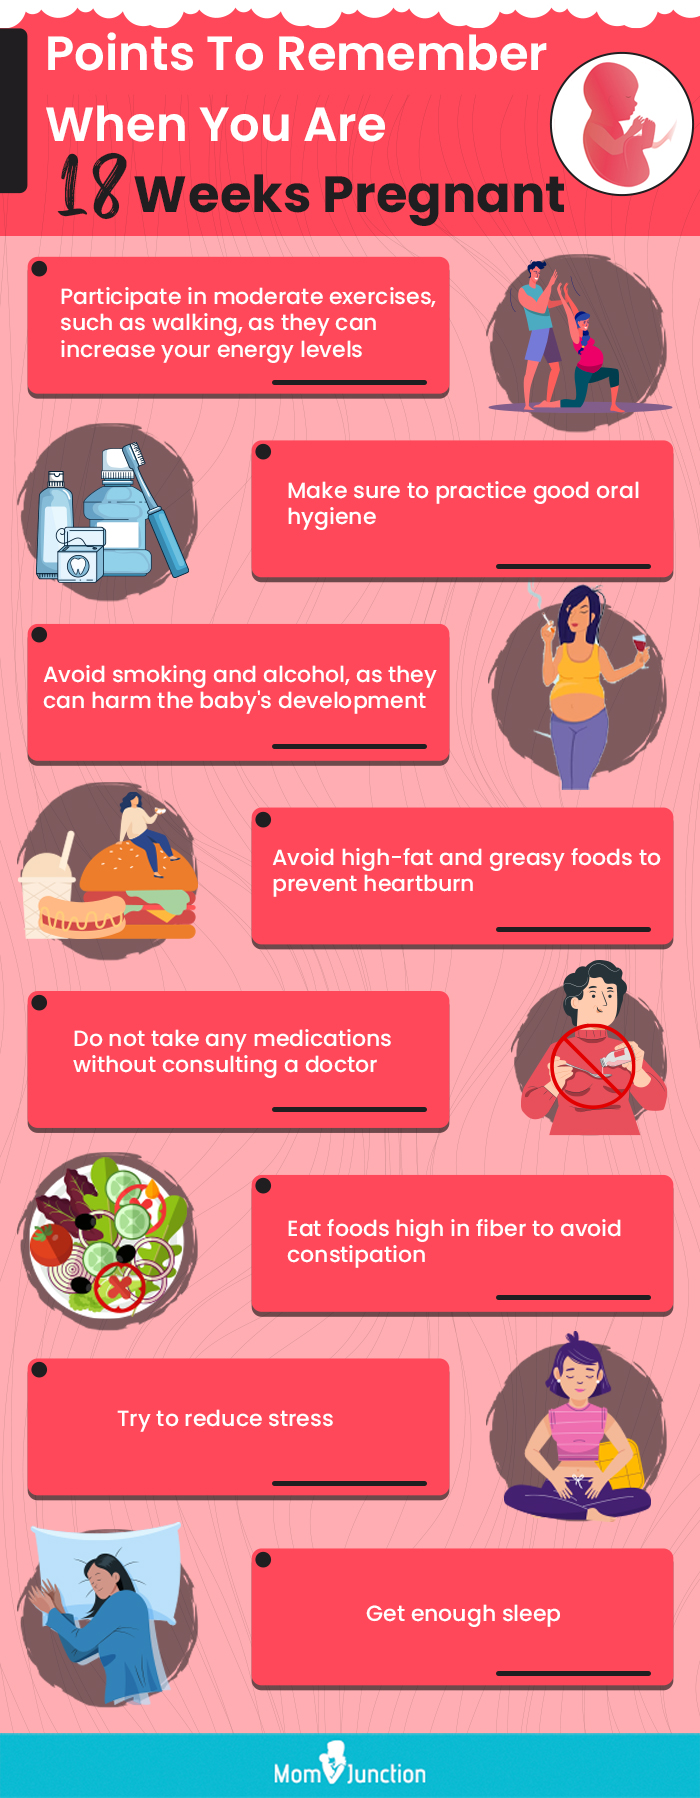 points to remember when you are 18 weeks pregnant [infographic]